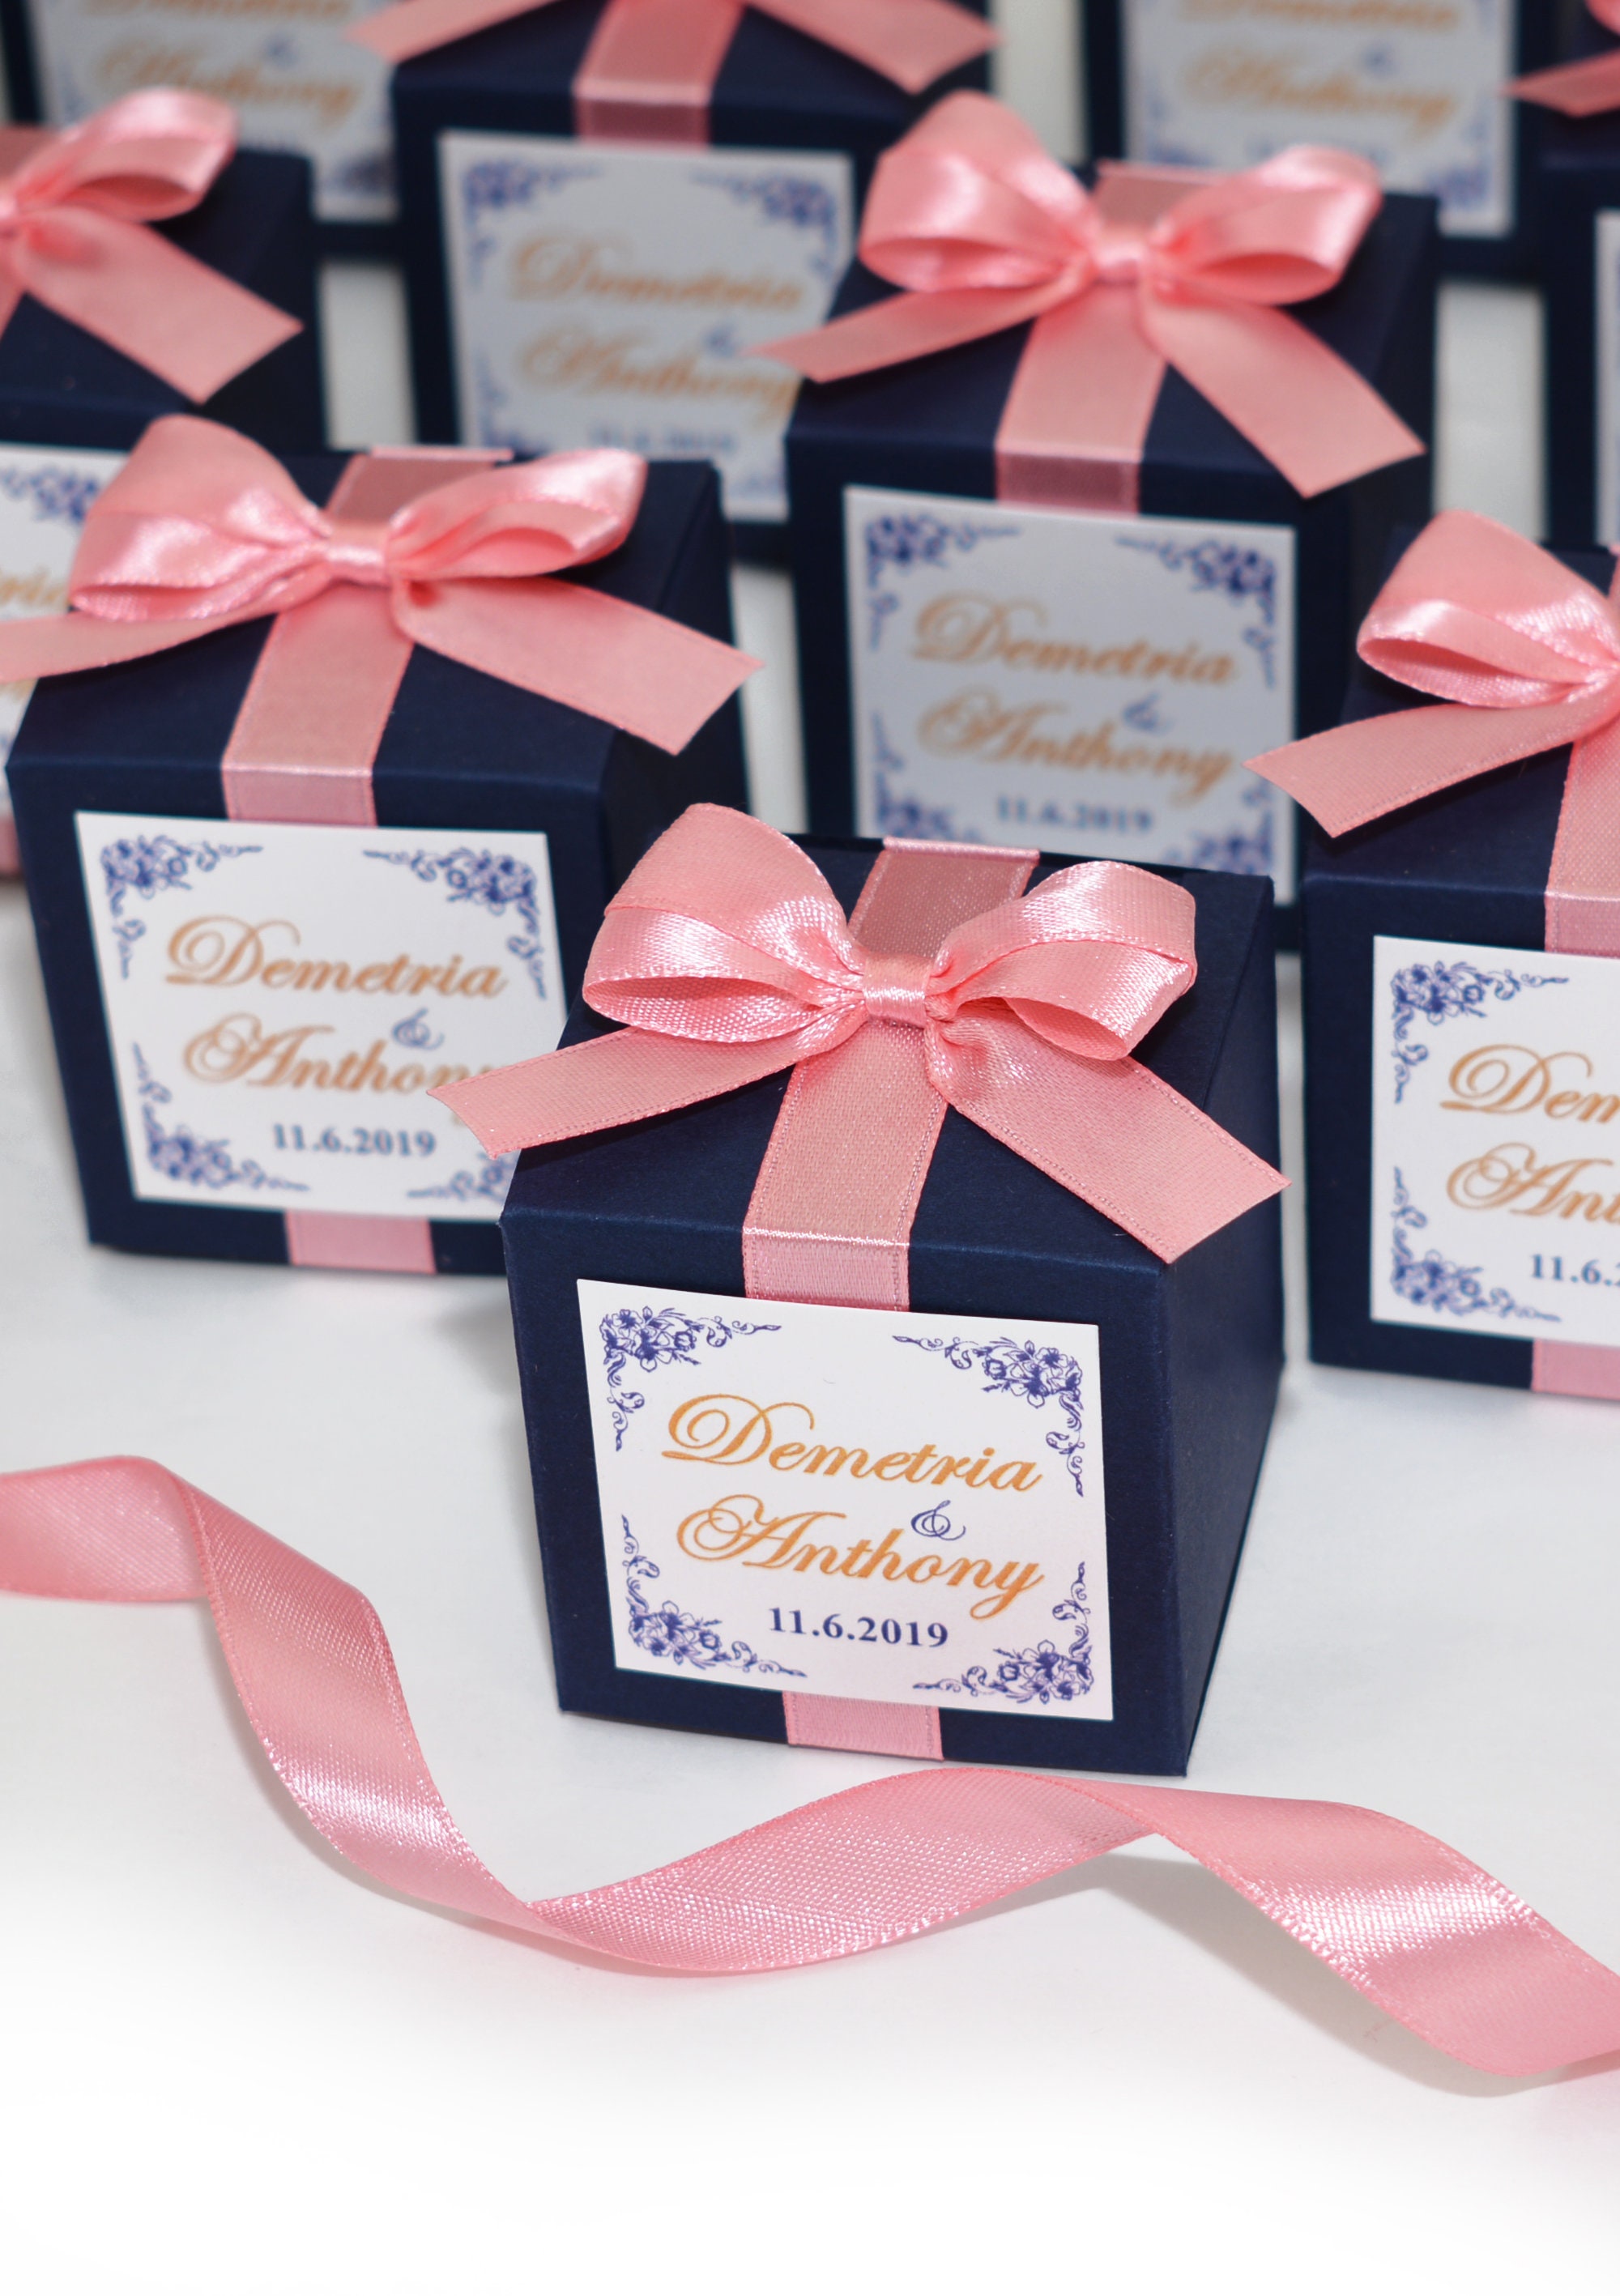 Fabulous Wedding Favours For Under £1 